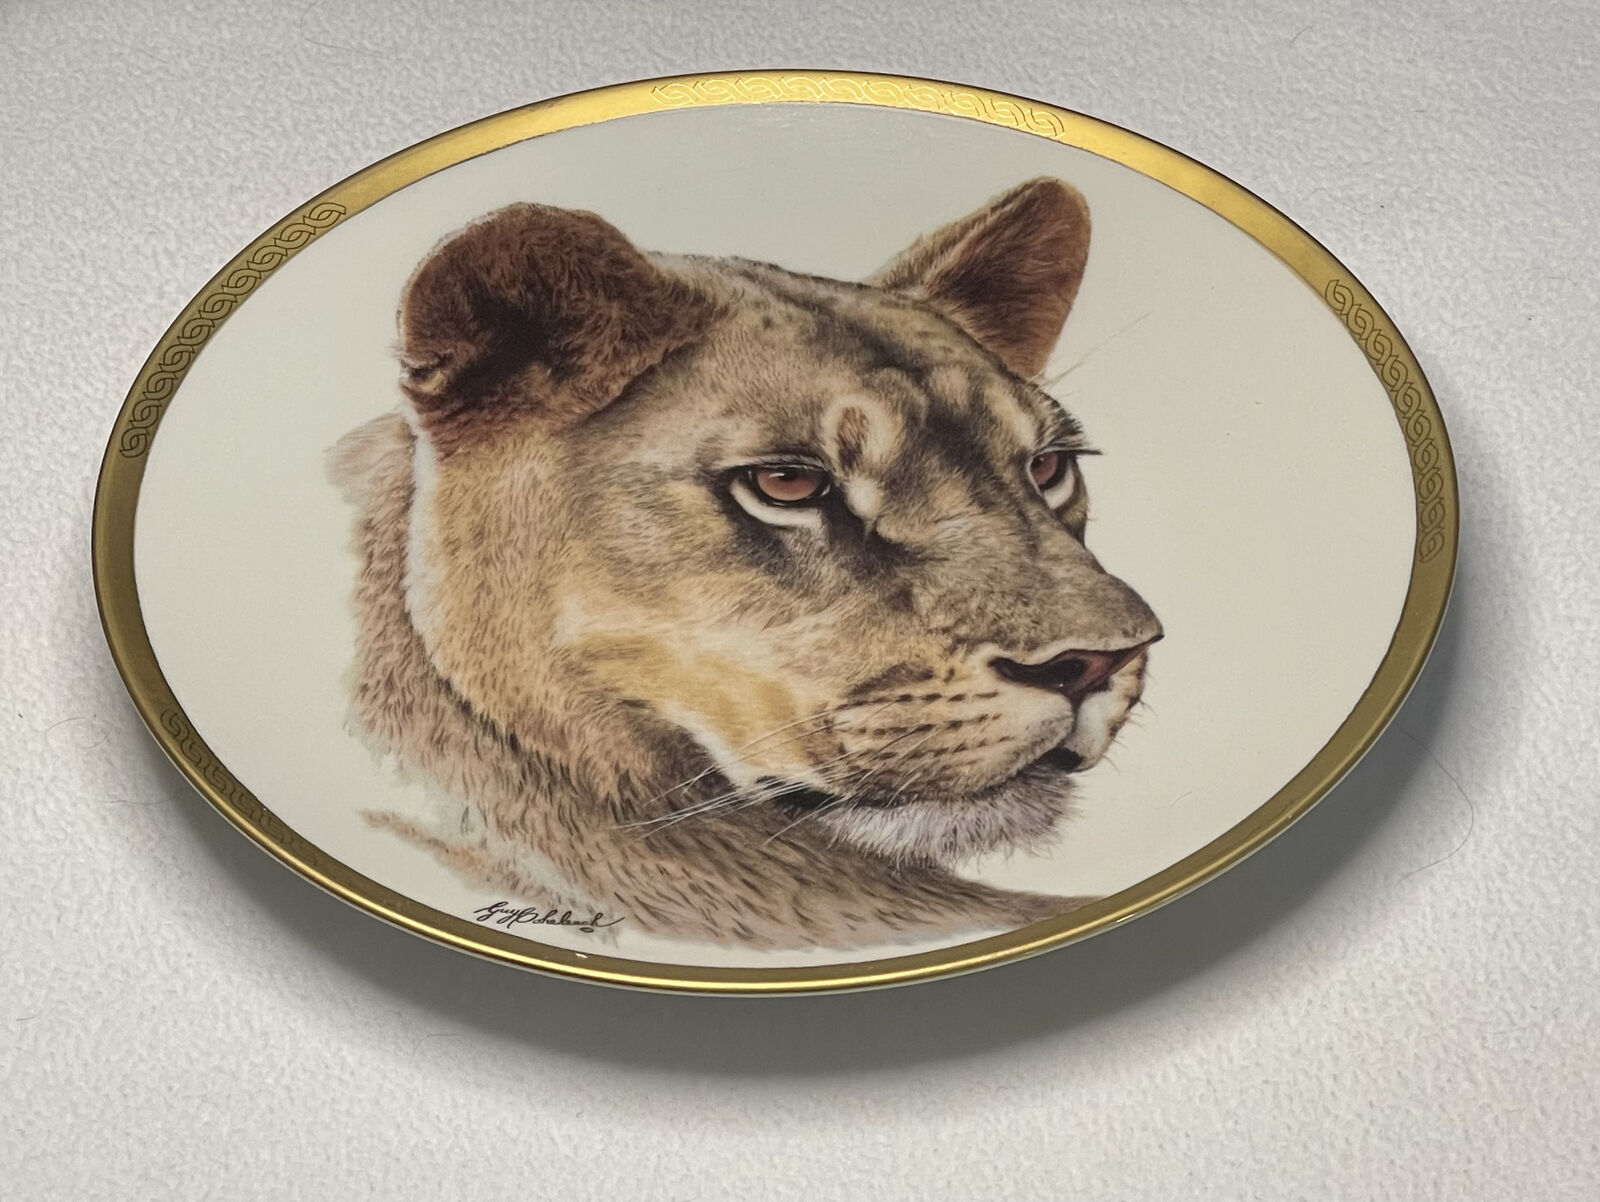 Lenox Great Cats Of The World Plate Collection Limited Edition 1994 - Lioness